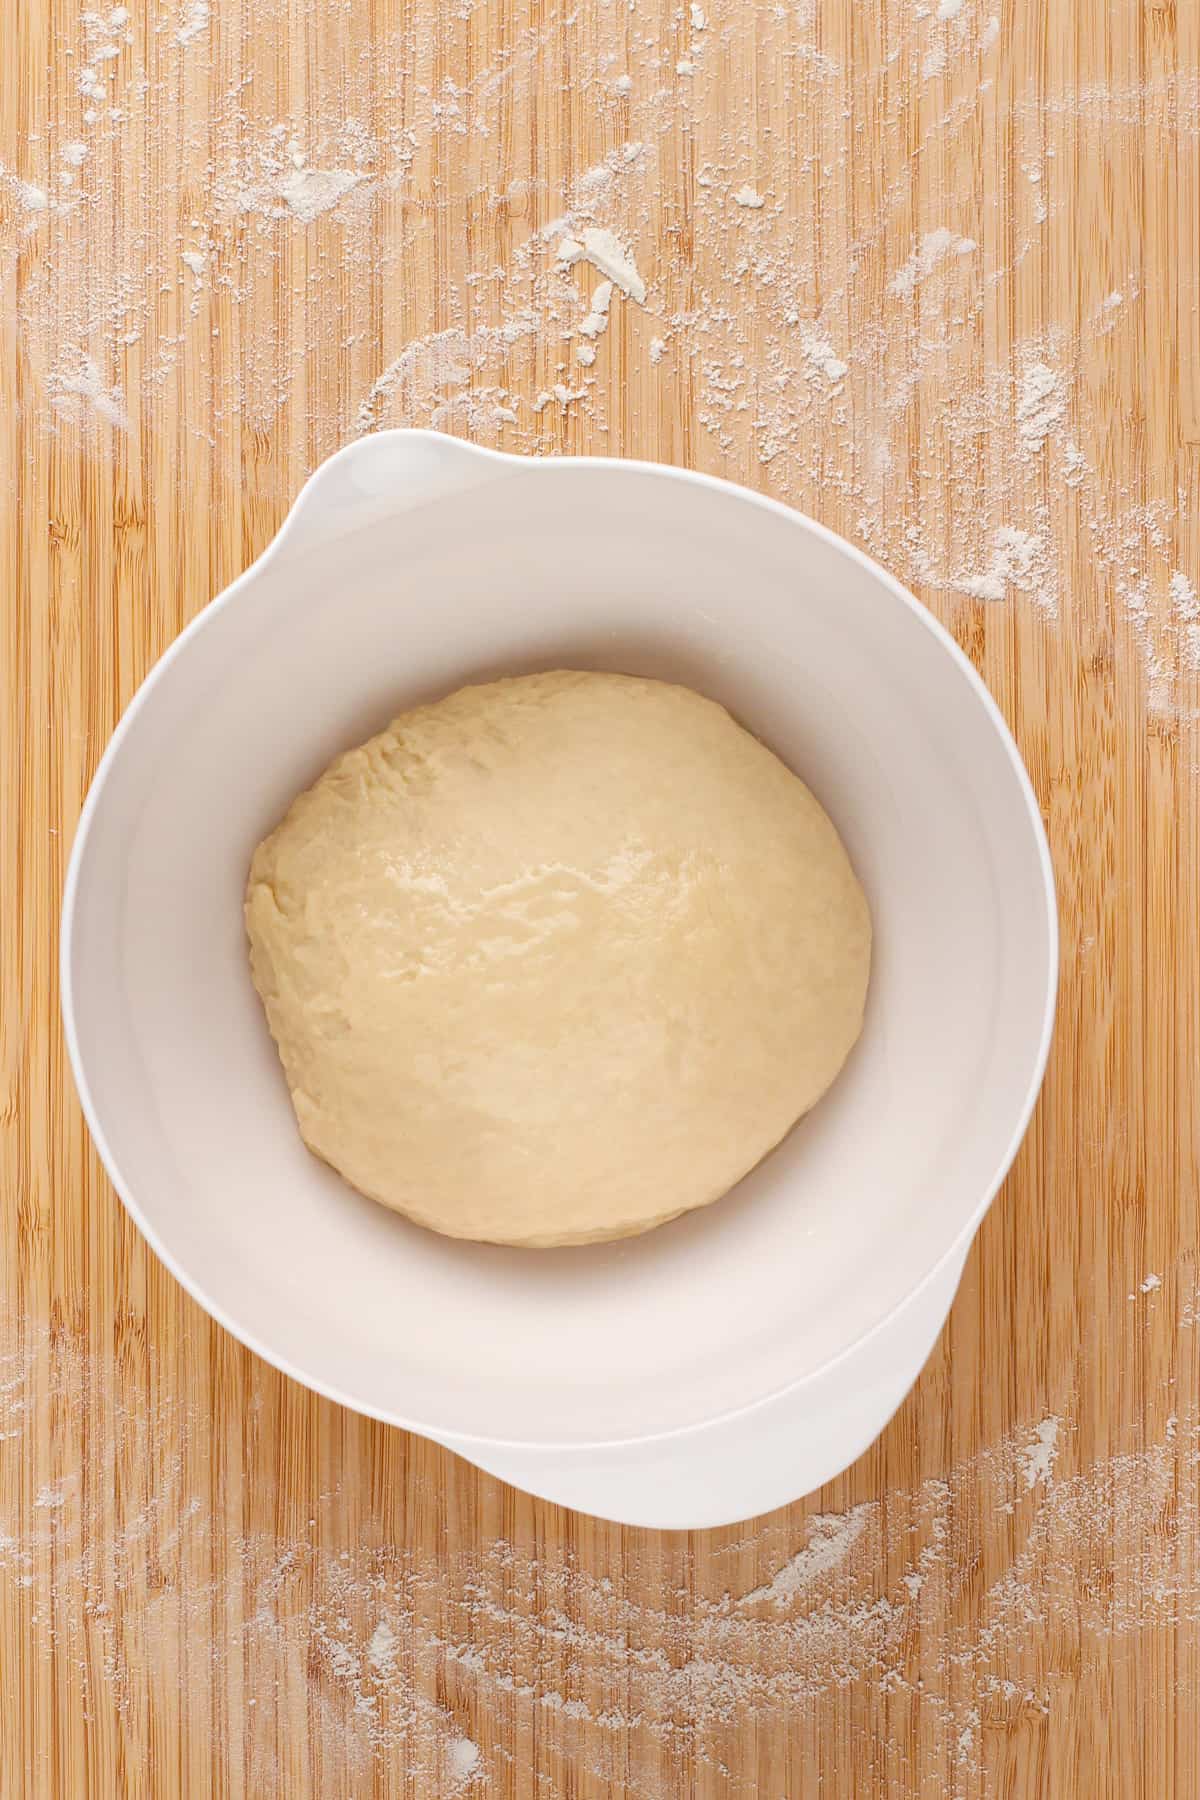 Kneaded bread dough in a white bowl, ready to rise.